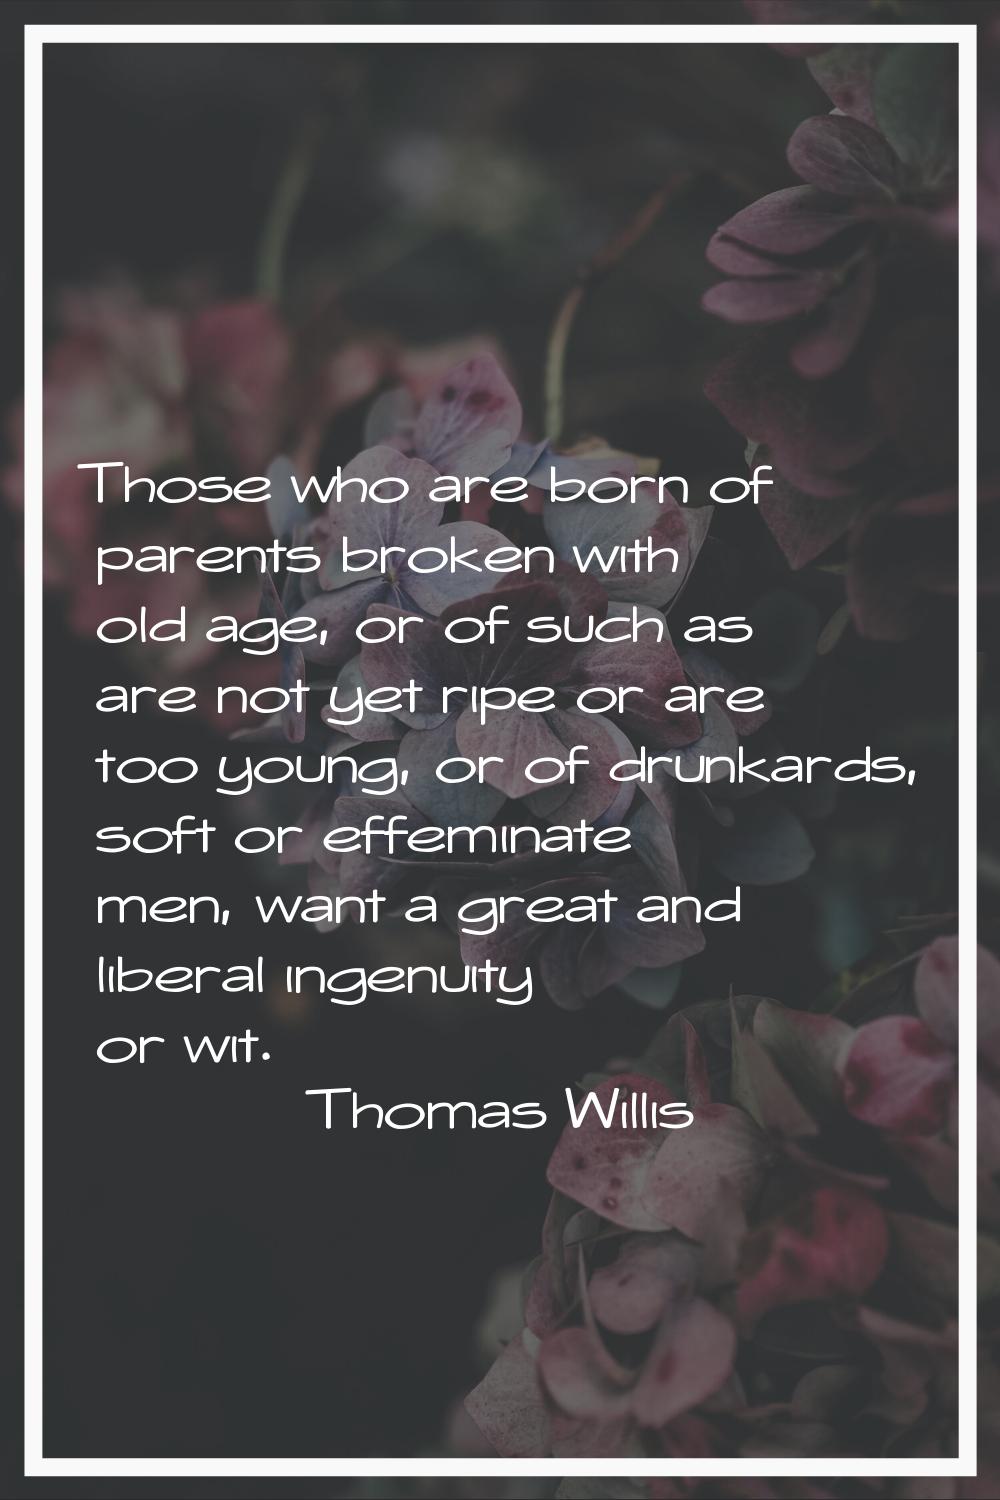 Those who are born of parents broken with old age, or of such as are not yet ripe or are too young,